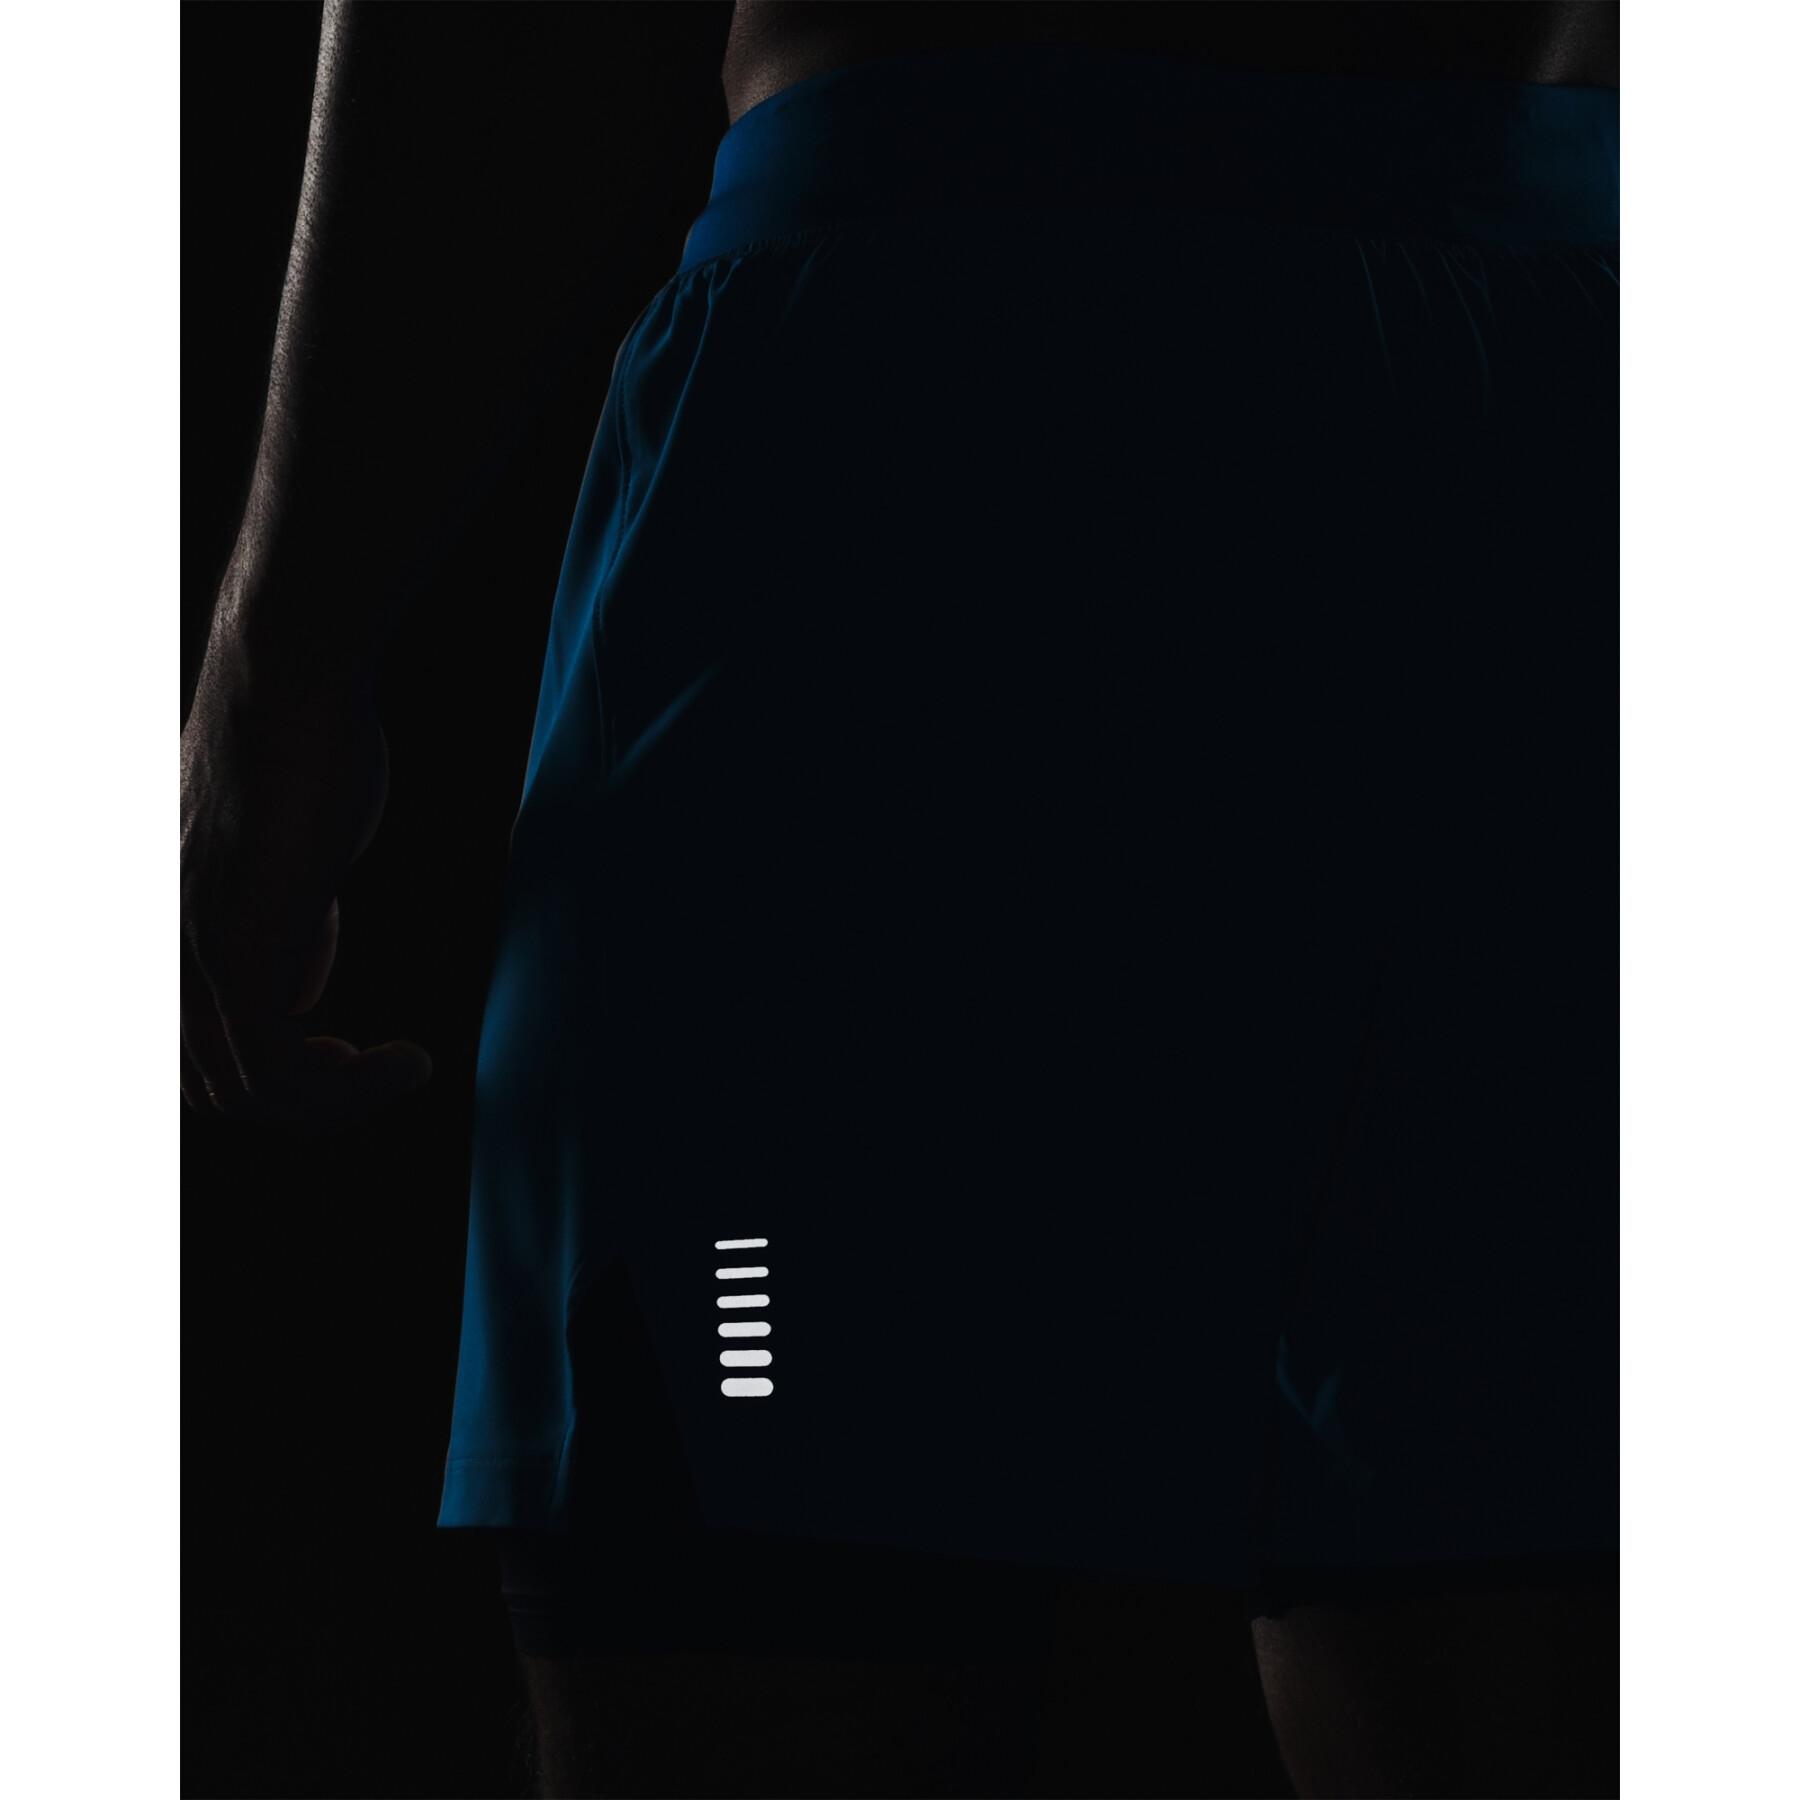 2-in-1 shorts Under Armour Iso-chill run